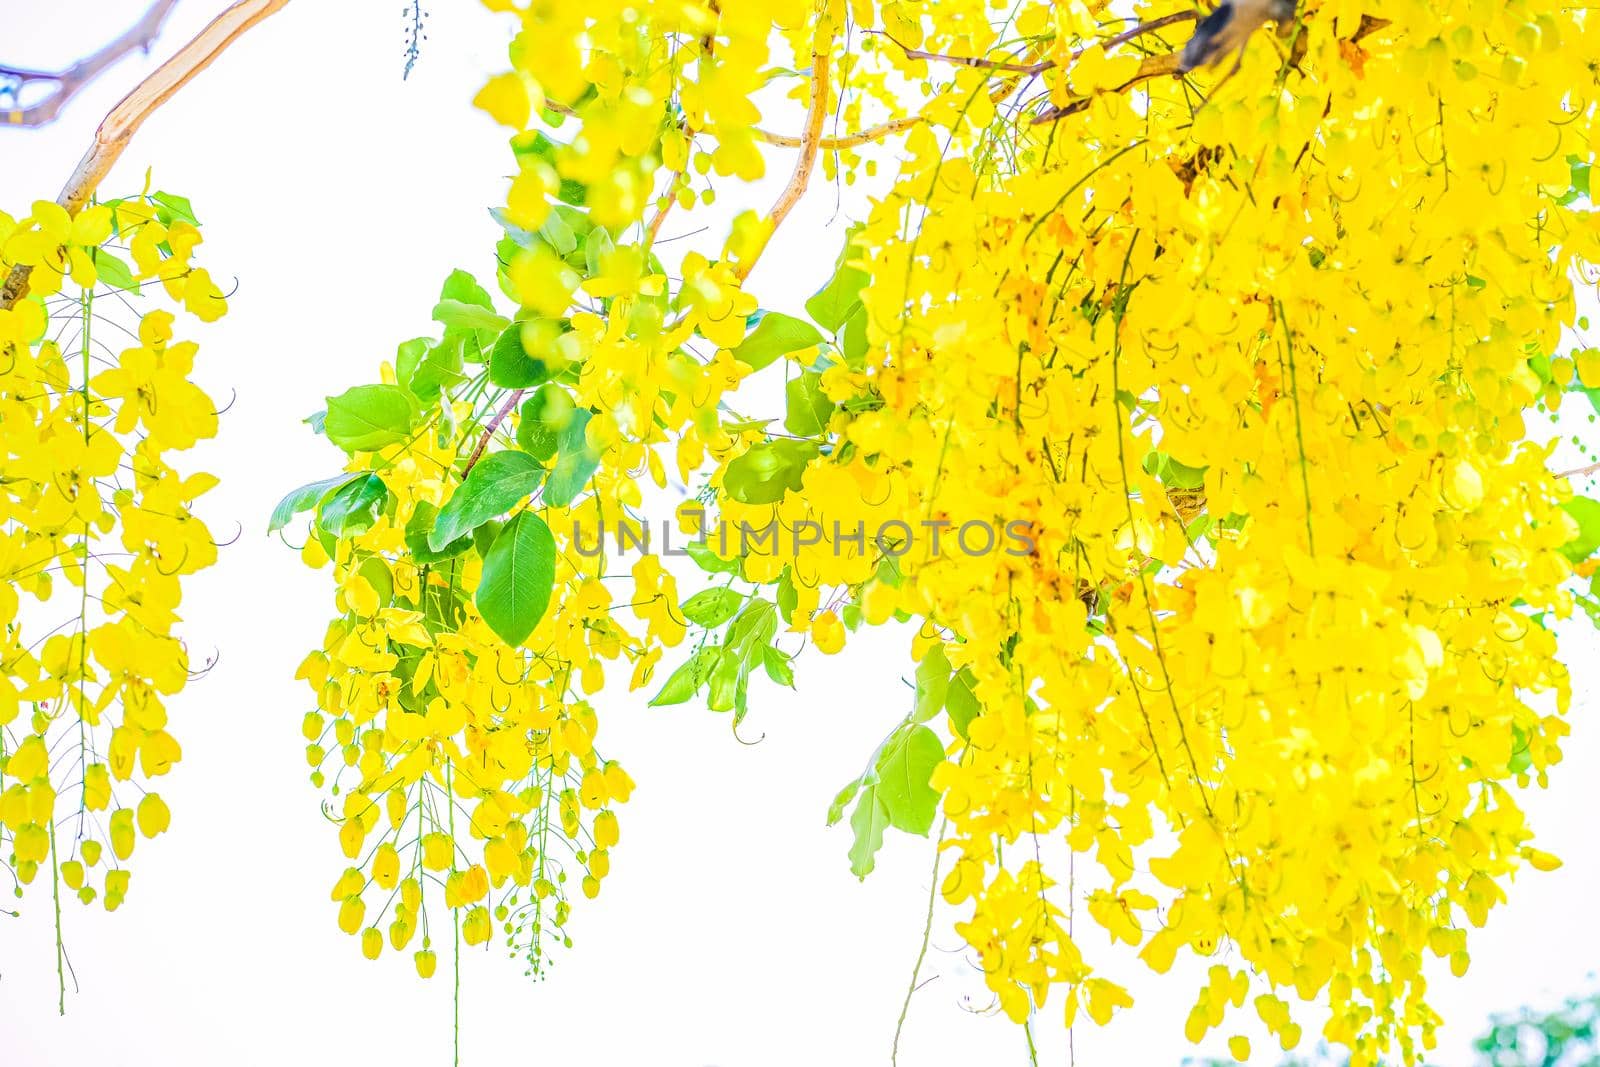 Yellow flowers in bloom. Beautiful bouquet with tropical flowers and plants on white background. Yellow wisteria.